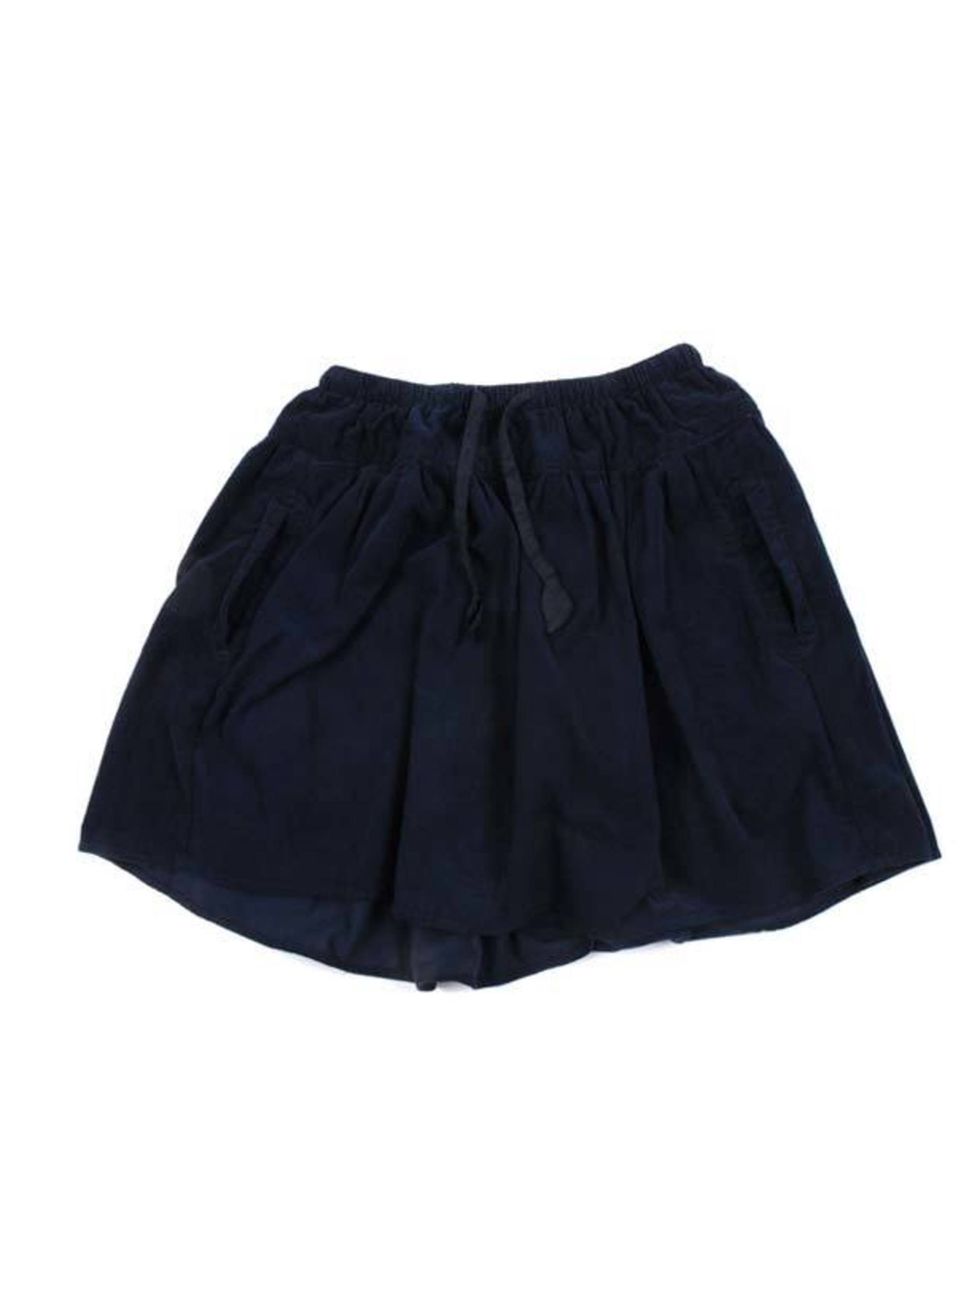 <p>Rittenhouse cord skirt, £112, available from <a href="http://goodhoodstore.com/?page=51&amp;id=1429&amp;type=womens">Goodhood</a></p>